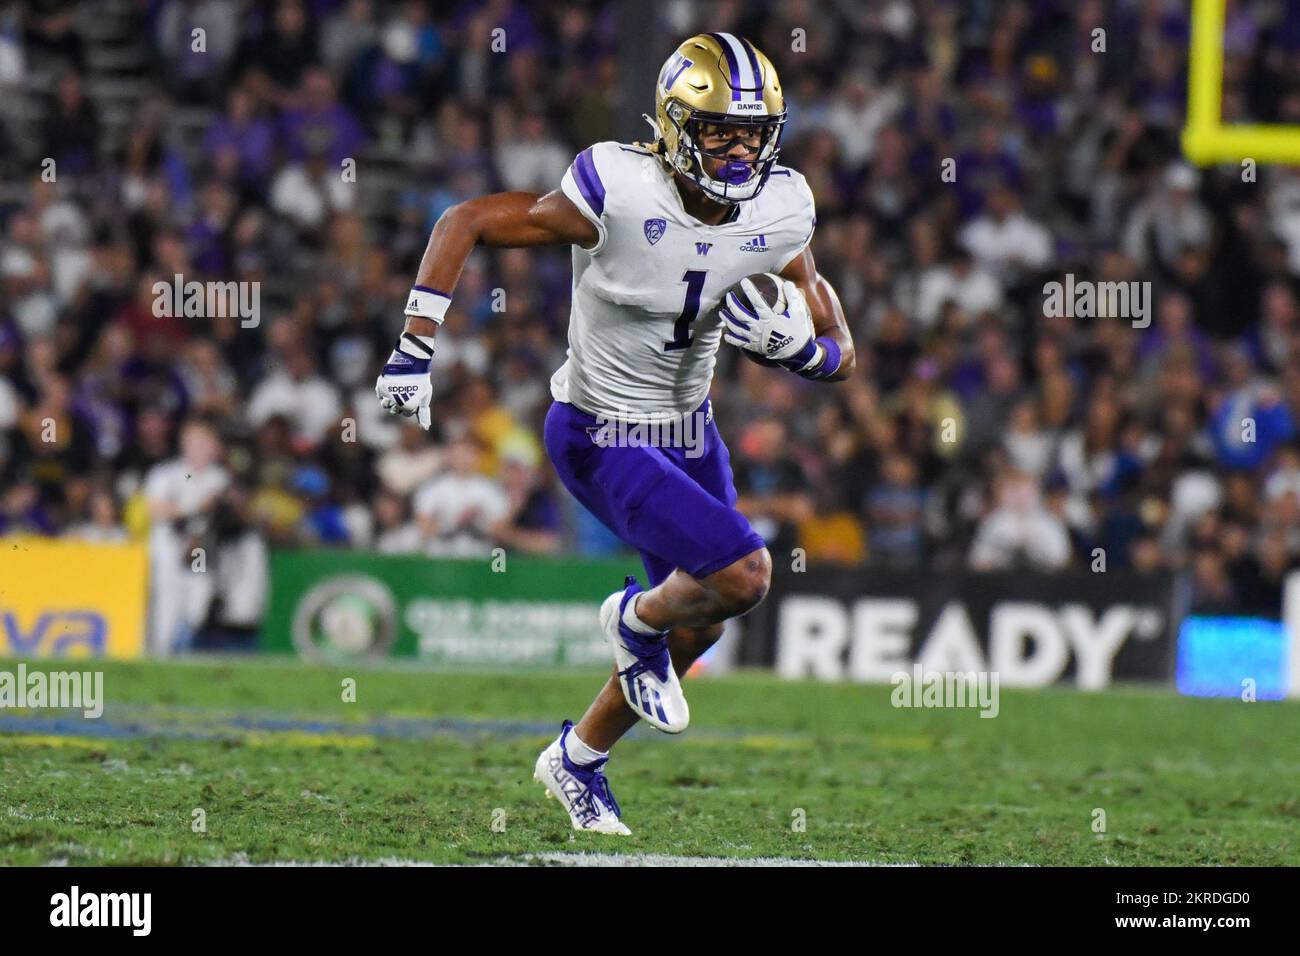 Washington Huskies wide receiver Rome Odunze (1) during an NCAA football game against the UCLA Bruins, Friday, Sep. 30, 2022, in Pasadena, Calif. The Stock Photo